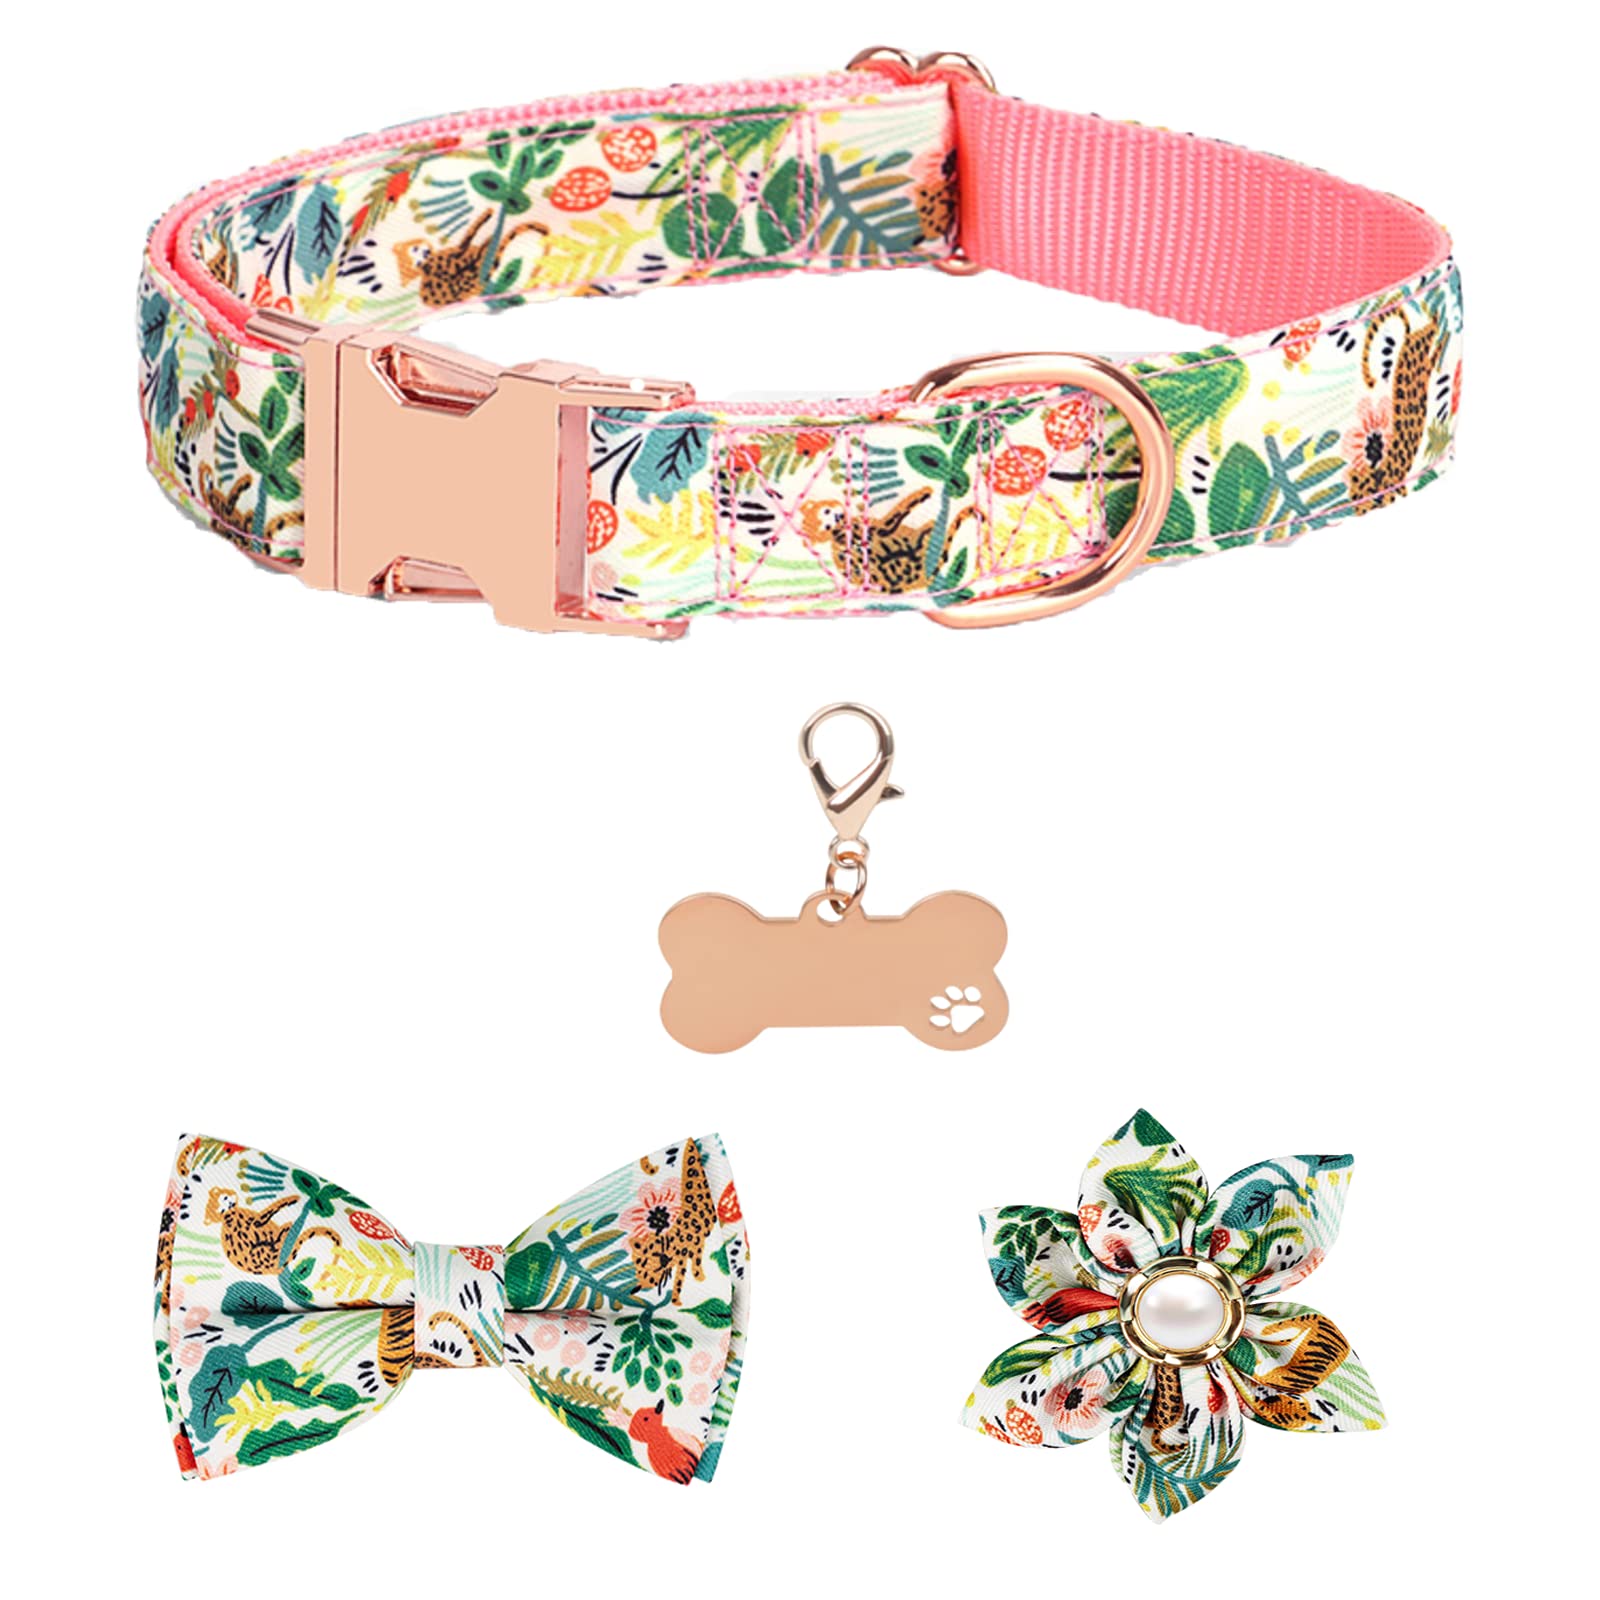 xiej Girl Dog Collars For Puppies Small Medium Large Dogs, Cute Pink Dog  Collar For Female Dogs With Adjustable Flower And Bow Tie Wi